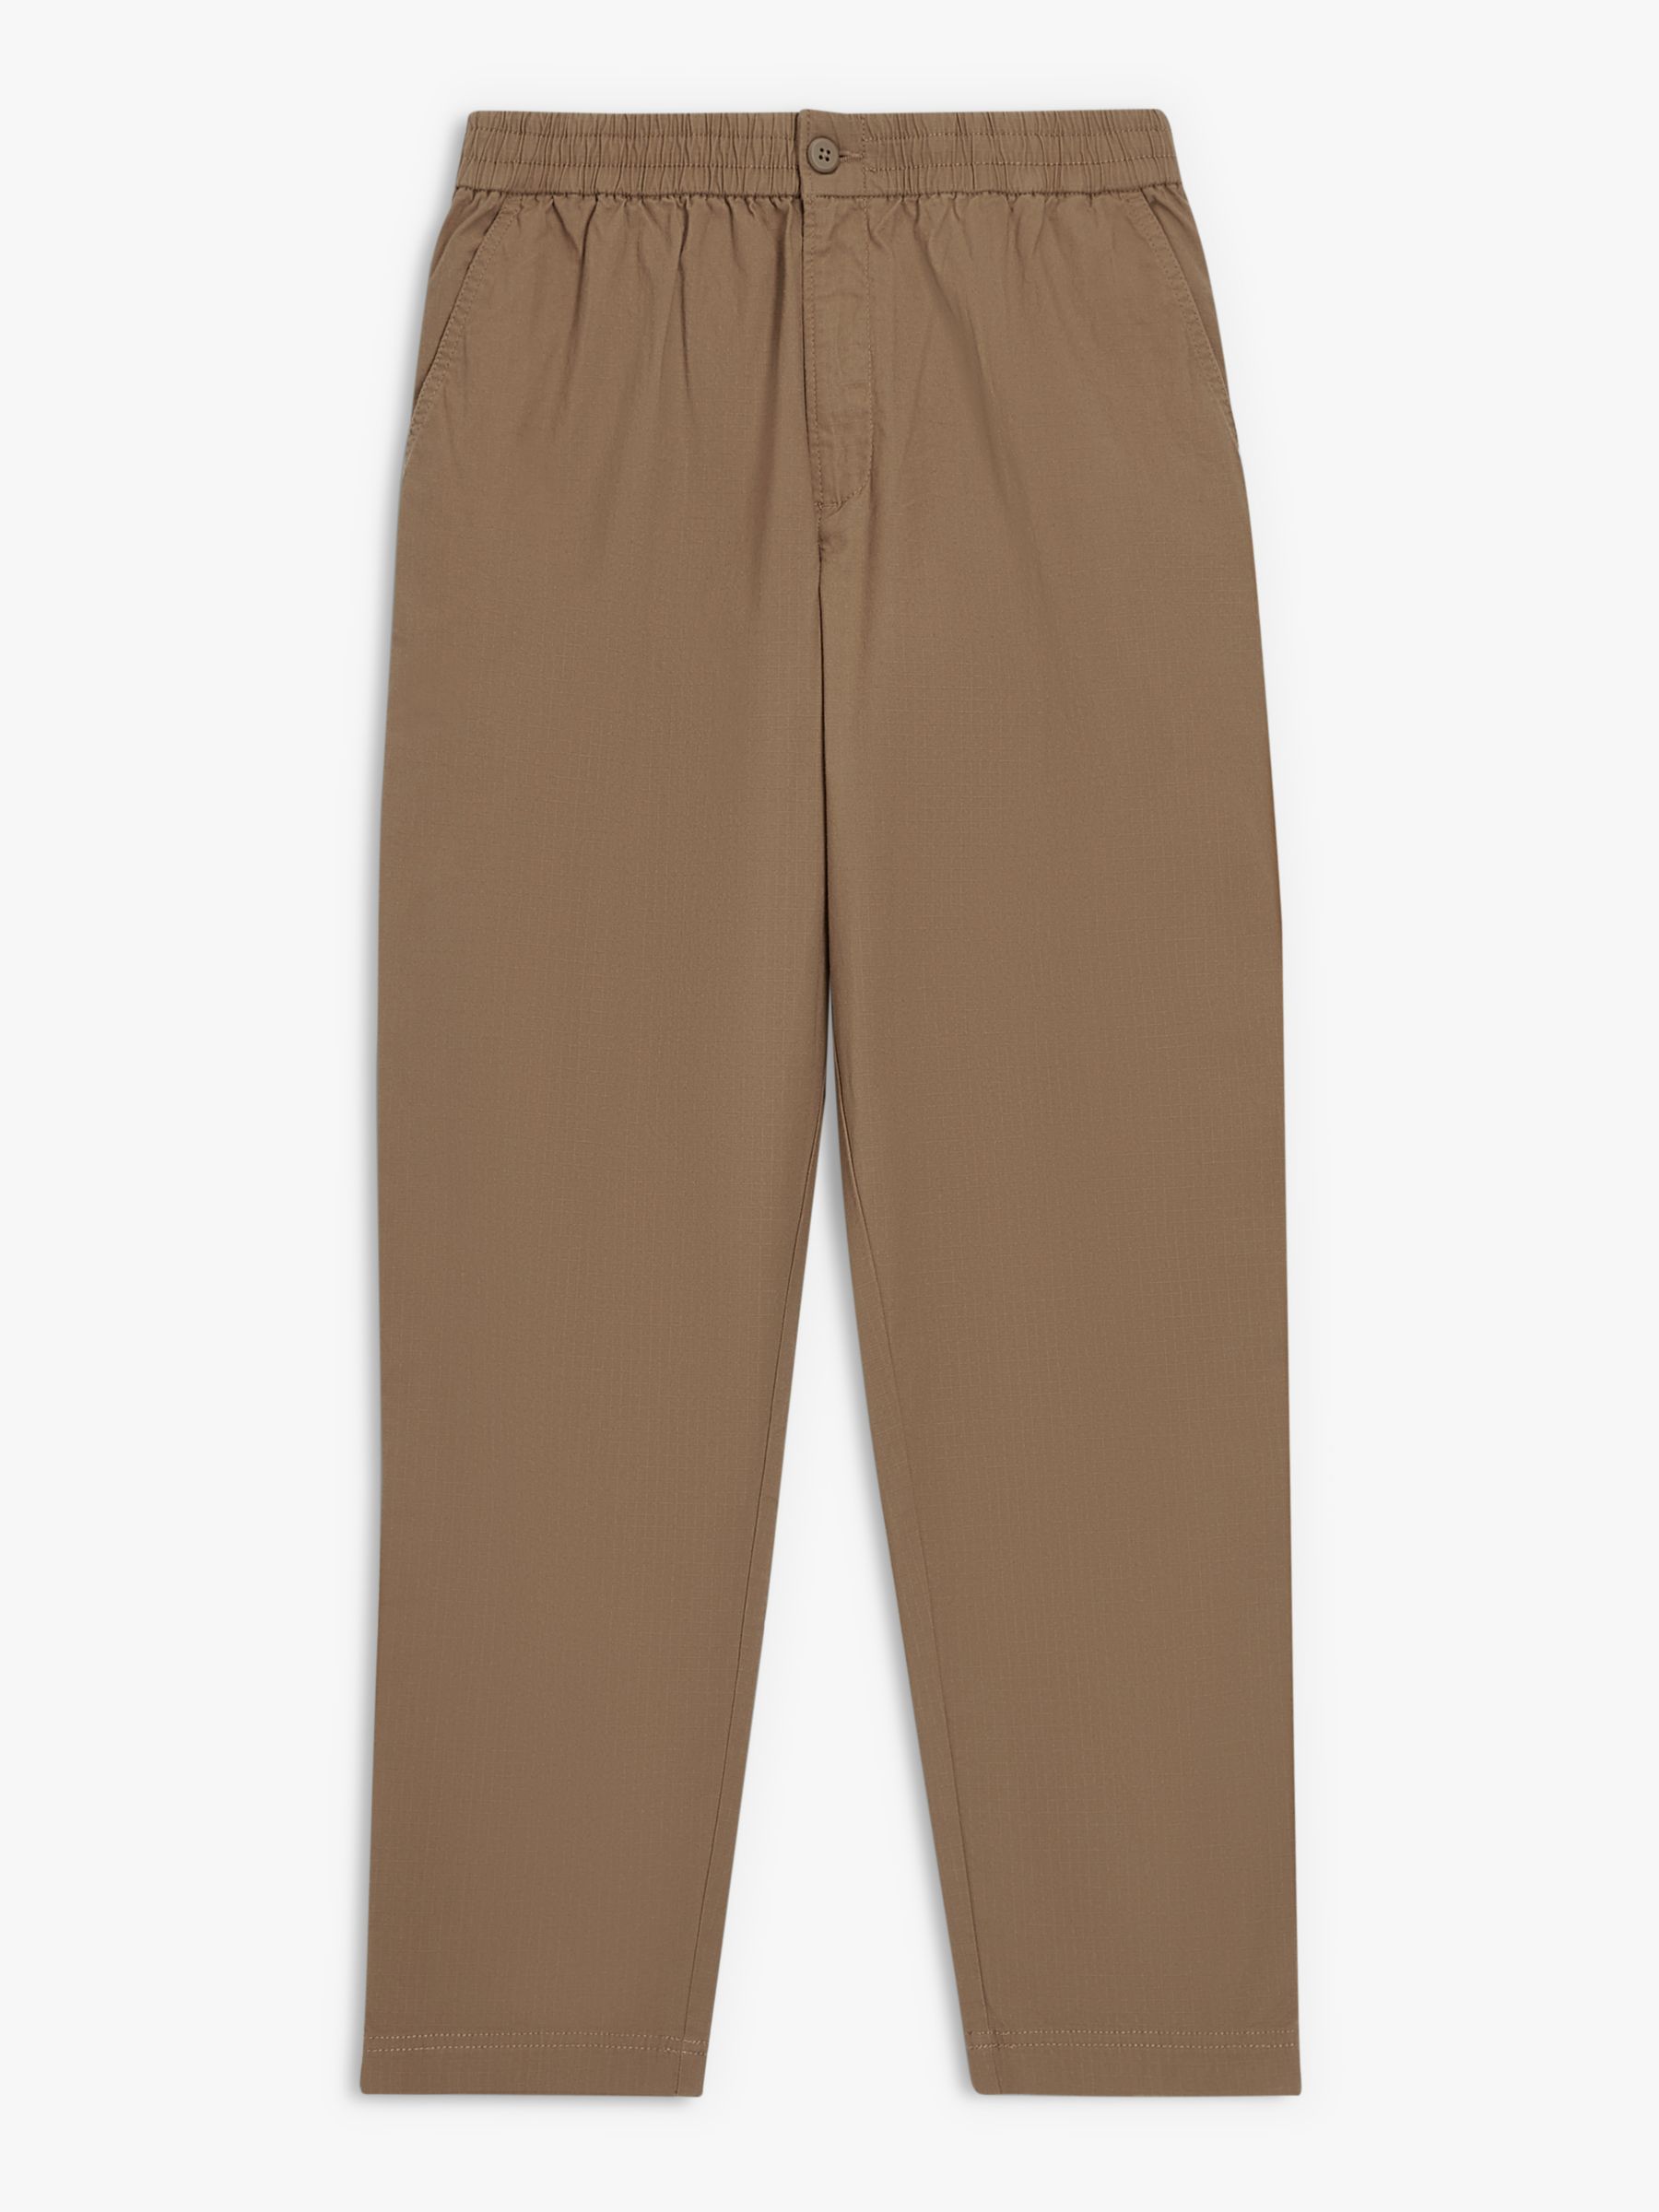 John Lewis ANYDAY Relaxed Fit Ripstop Stretch Cotton Ankle Trousers, Chestnut, S